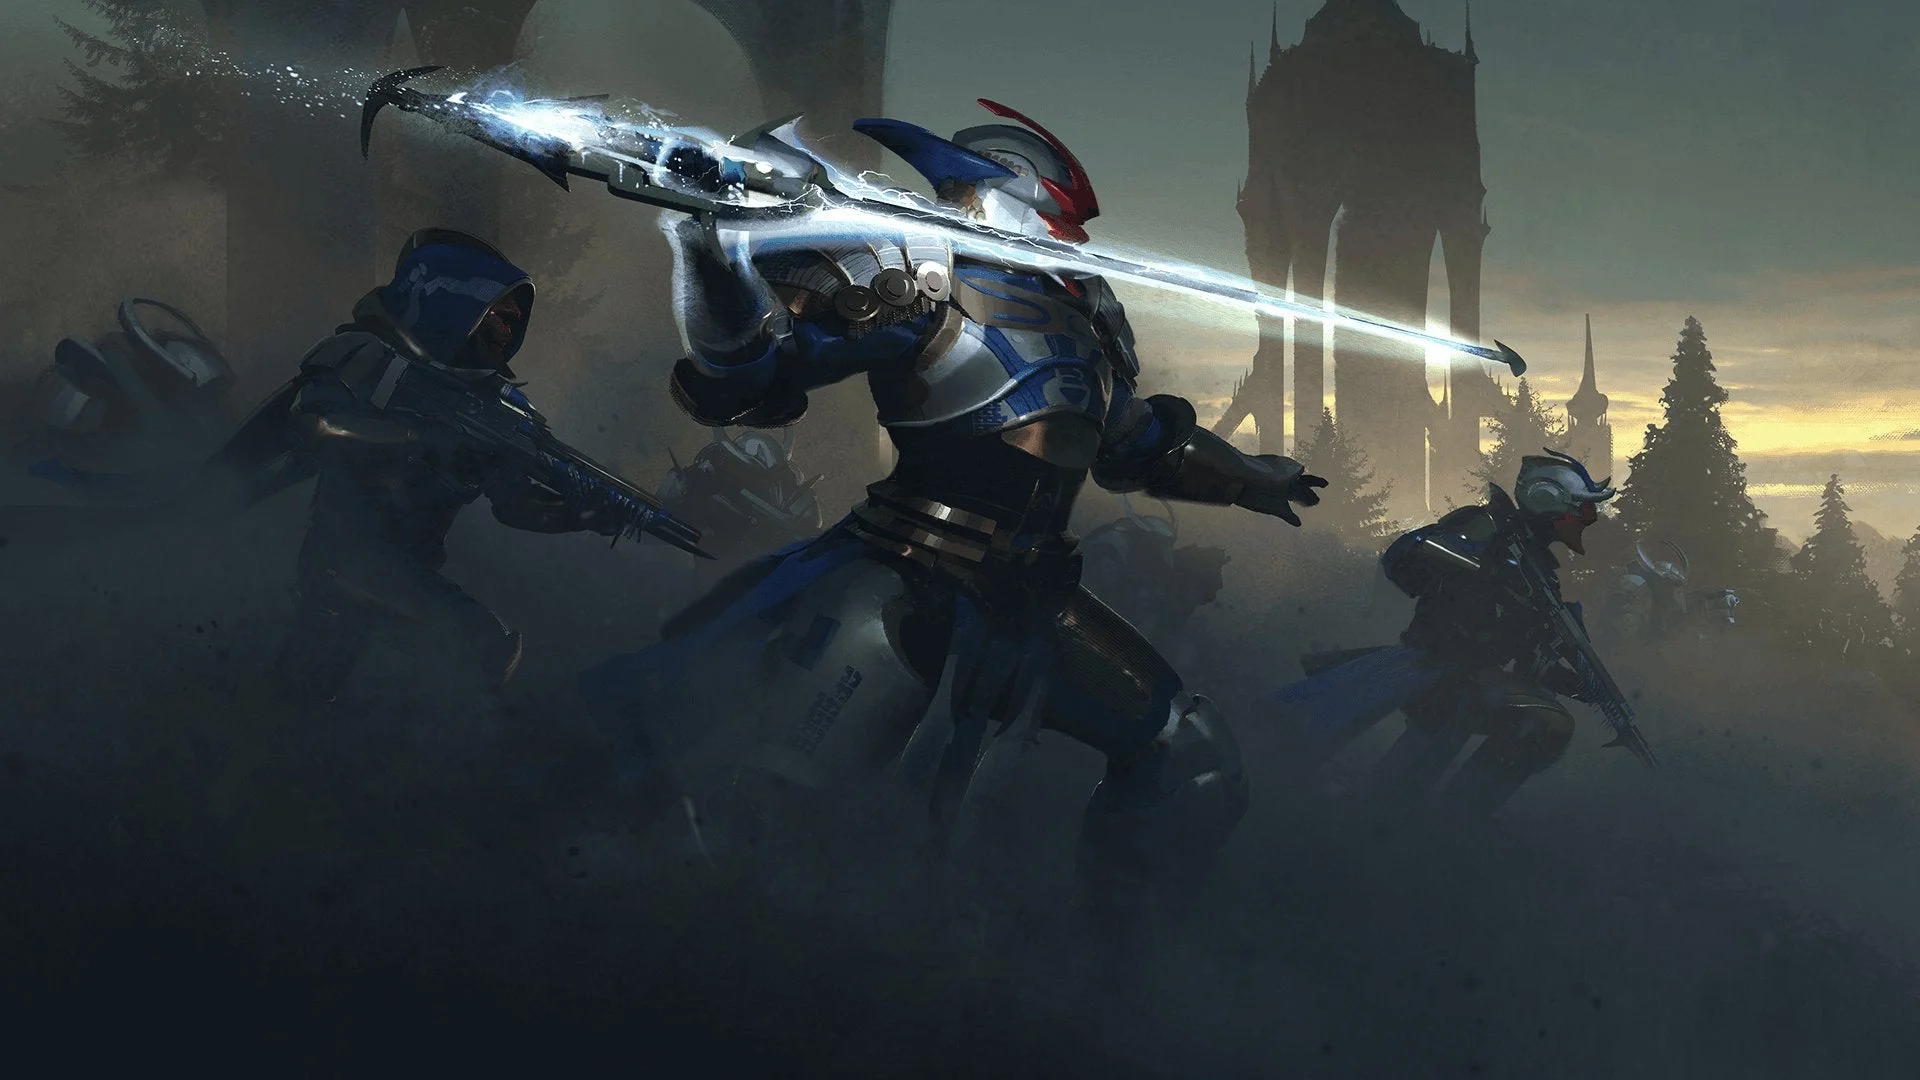 A group of Guardians and Cabal Psions charging into Battle. With a Titan using a Synaptic Spear